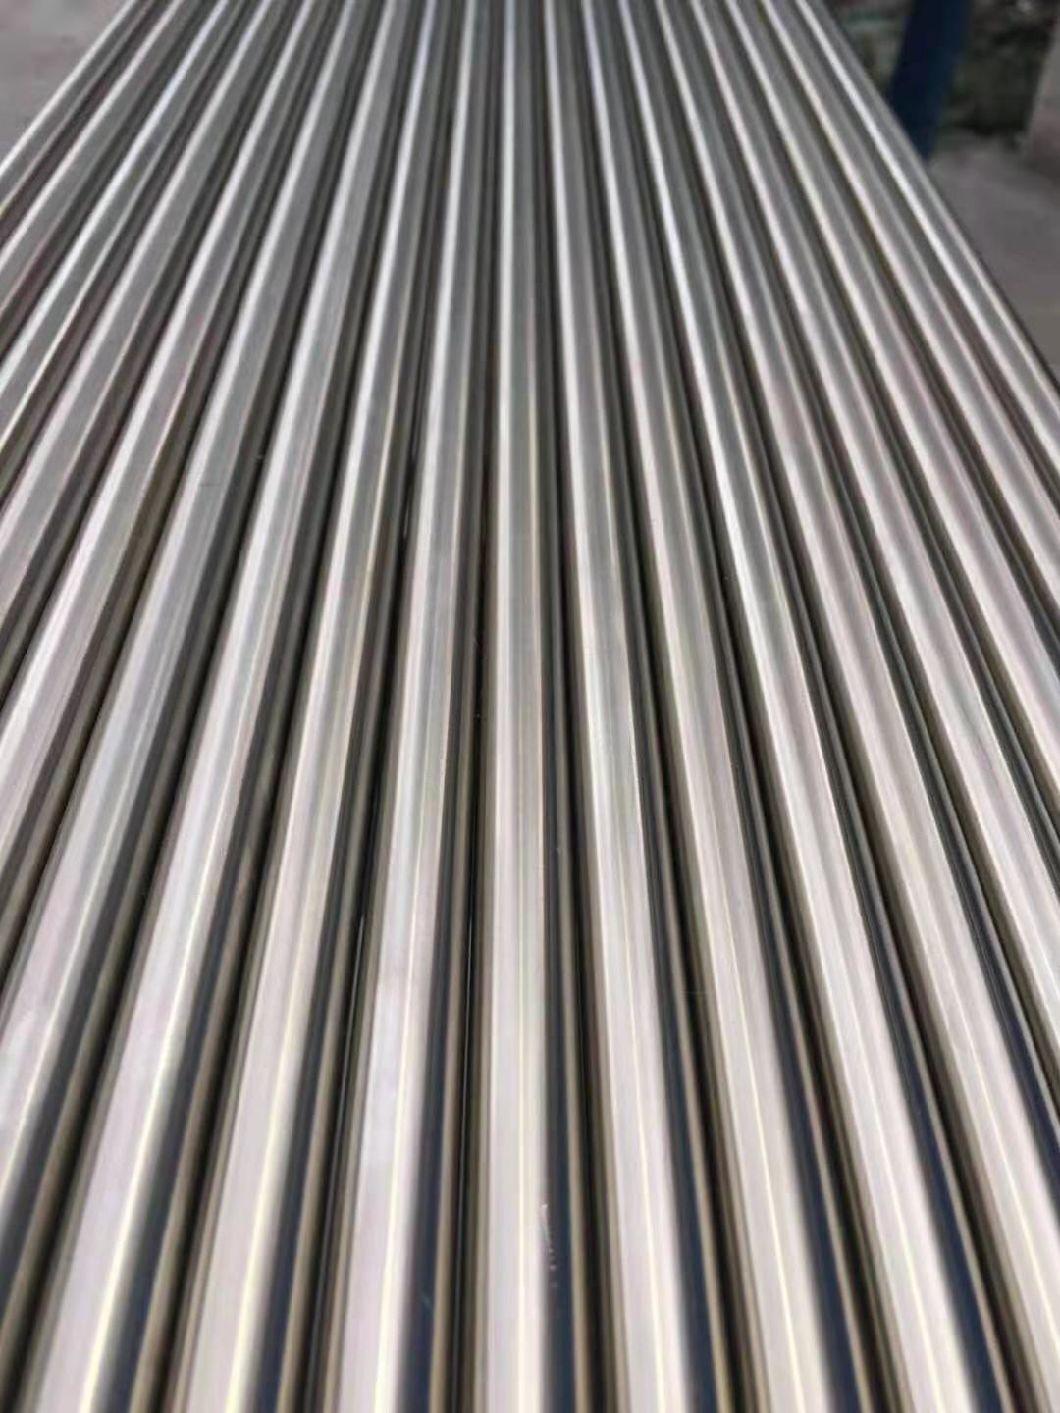 630 (1.4542) Stainless Steel 17-4pH, 1.4542, AISI 630, 1.4548 Stainless Steel Bar